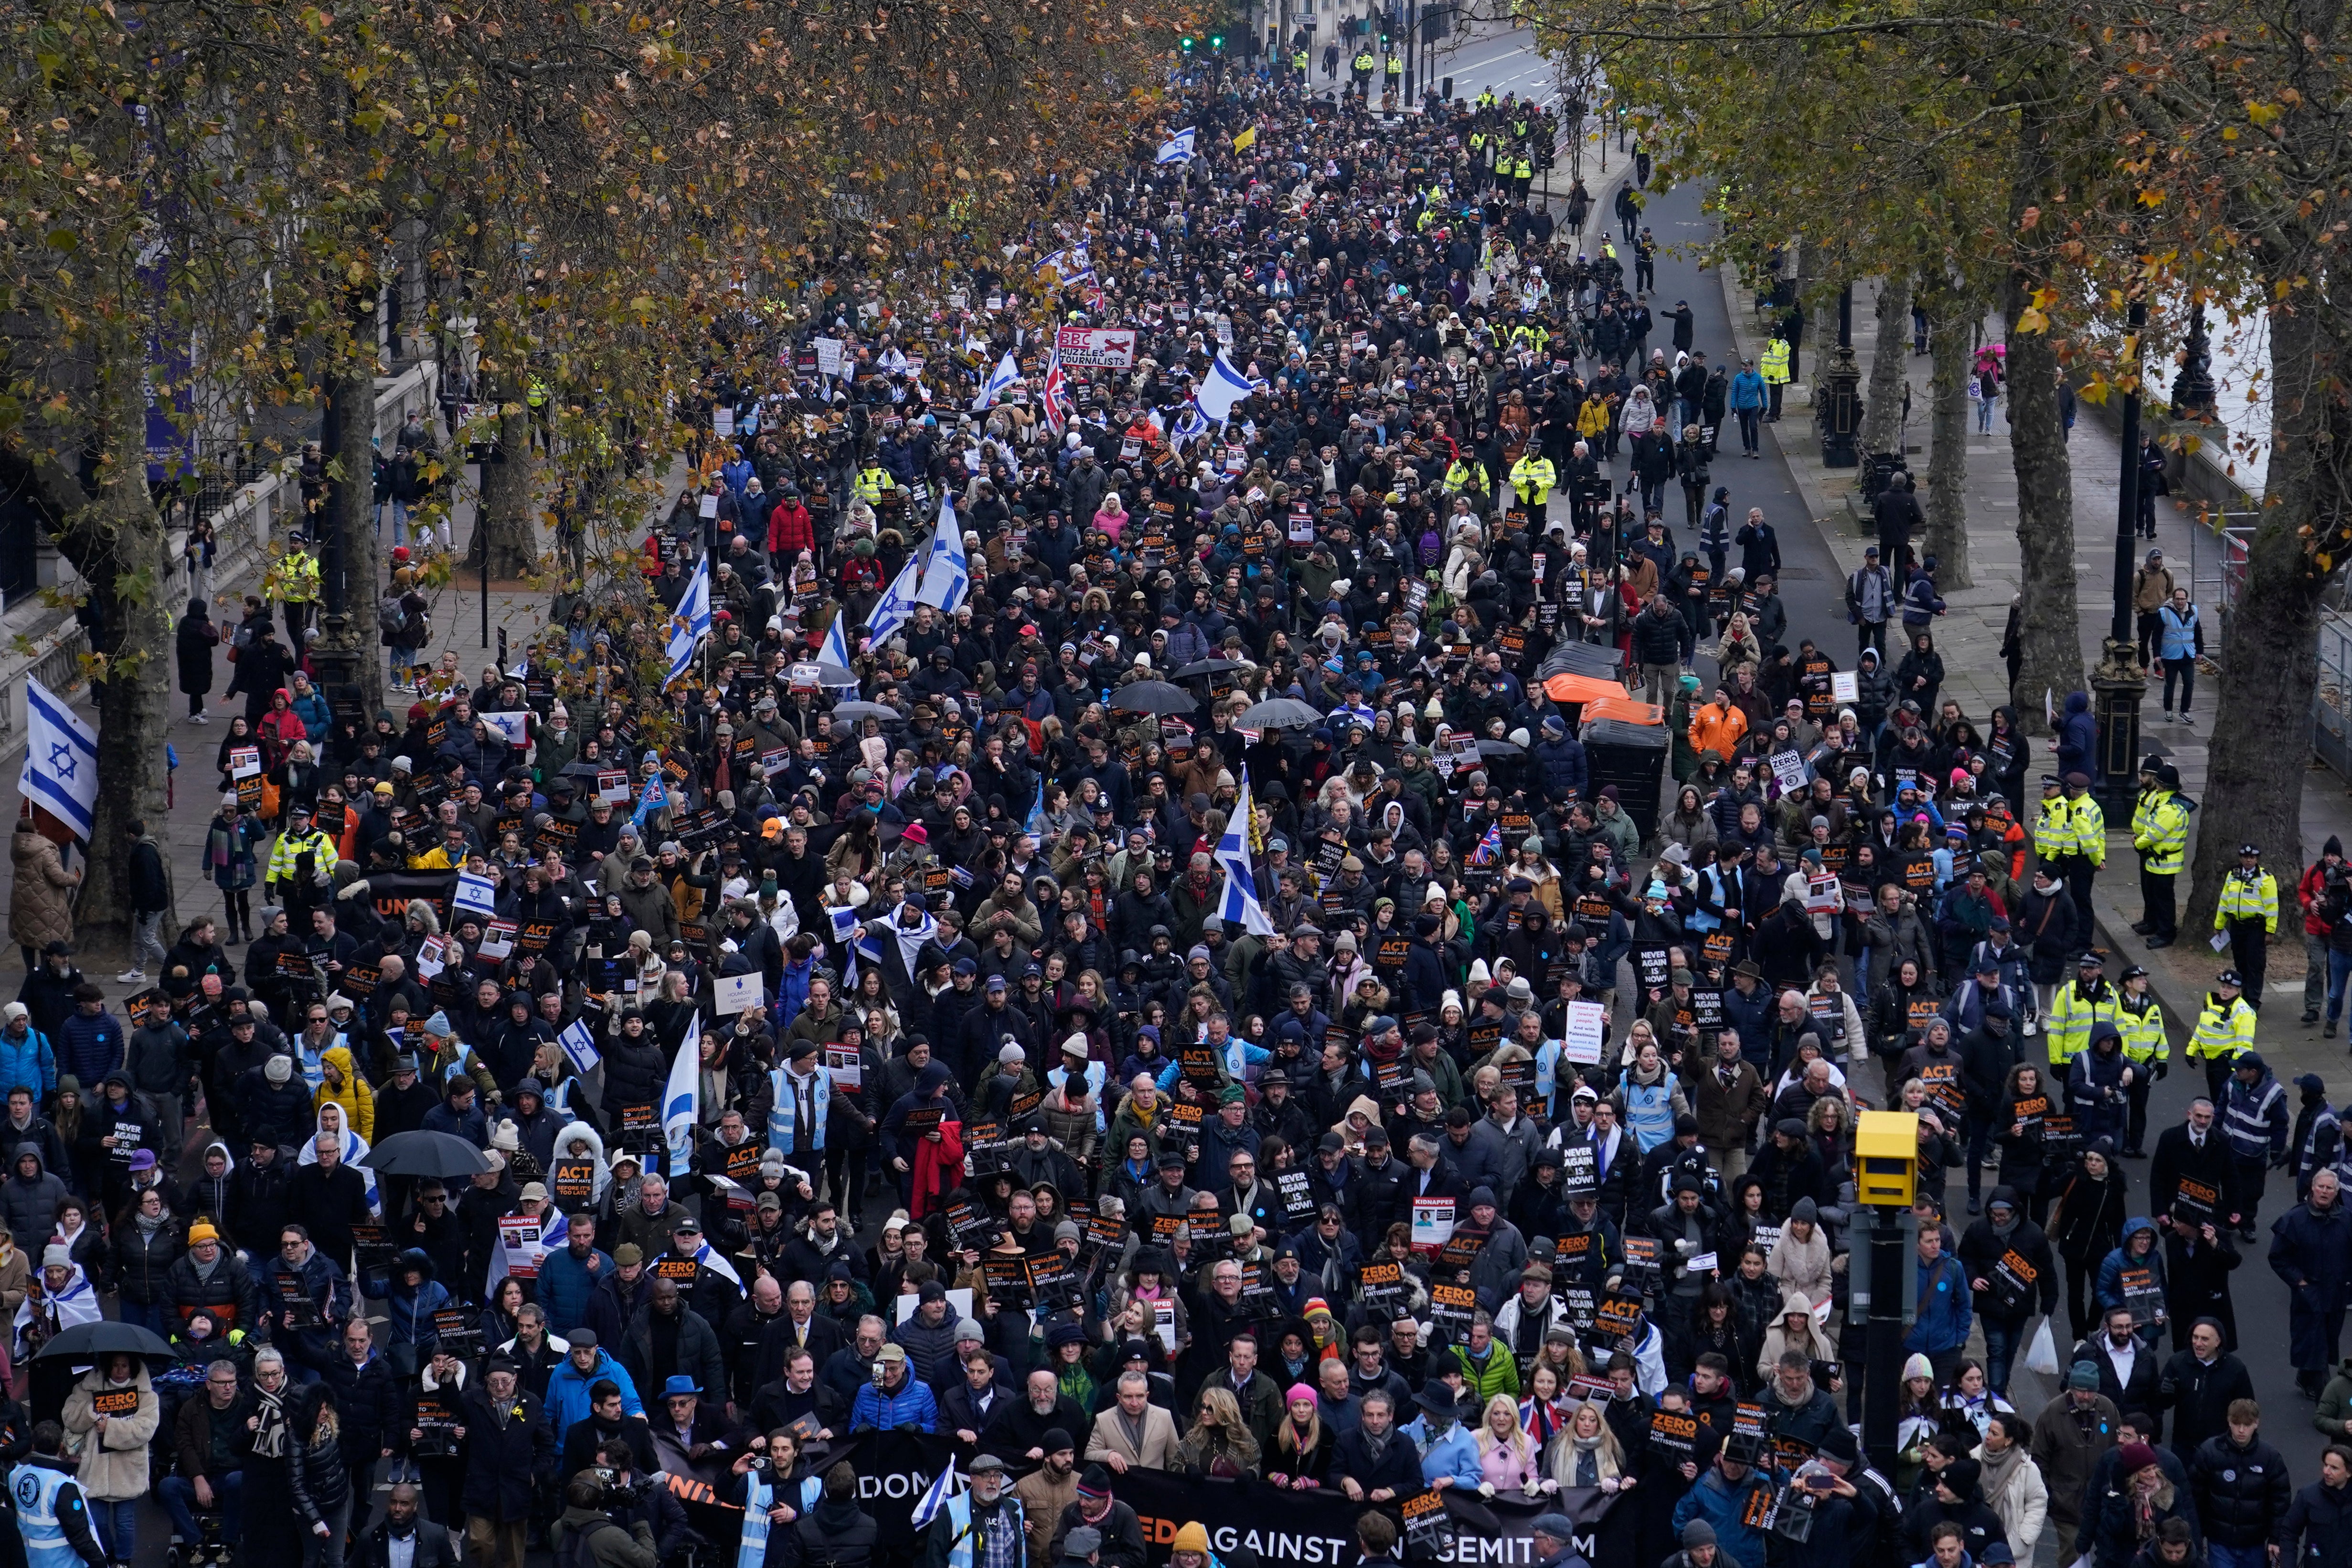 Thousands marched from the Royal Courts of Justice to Parliament Square